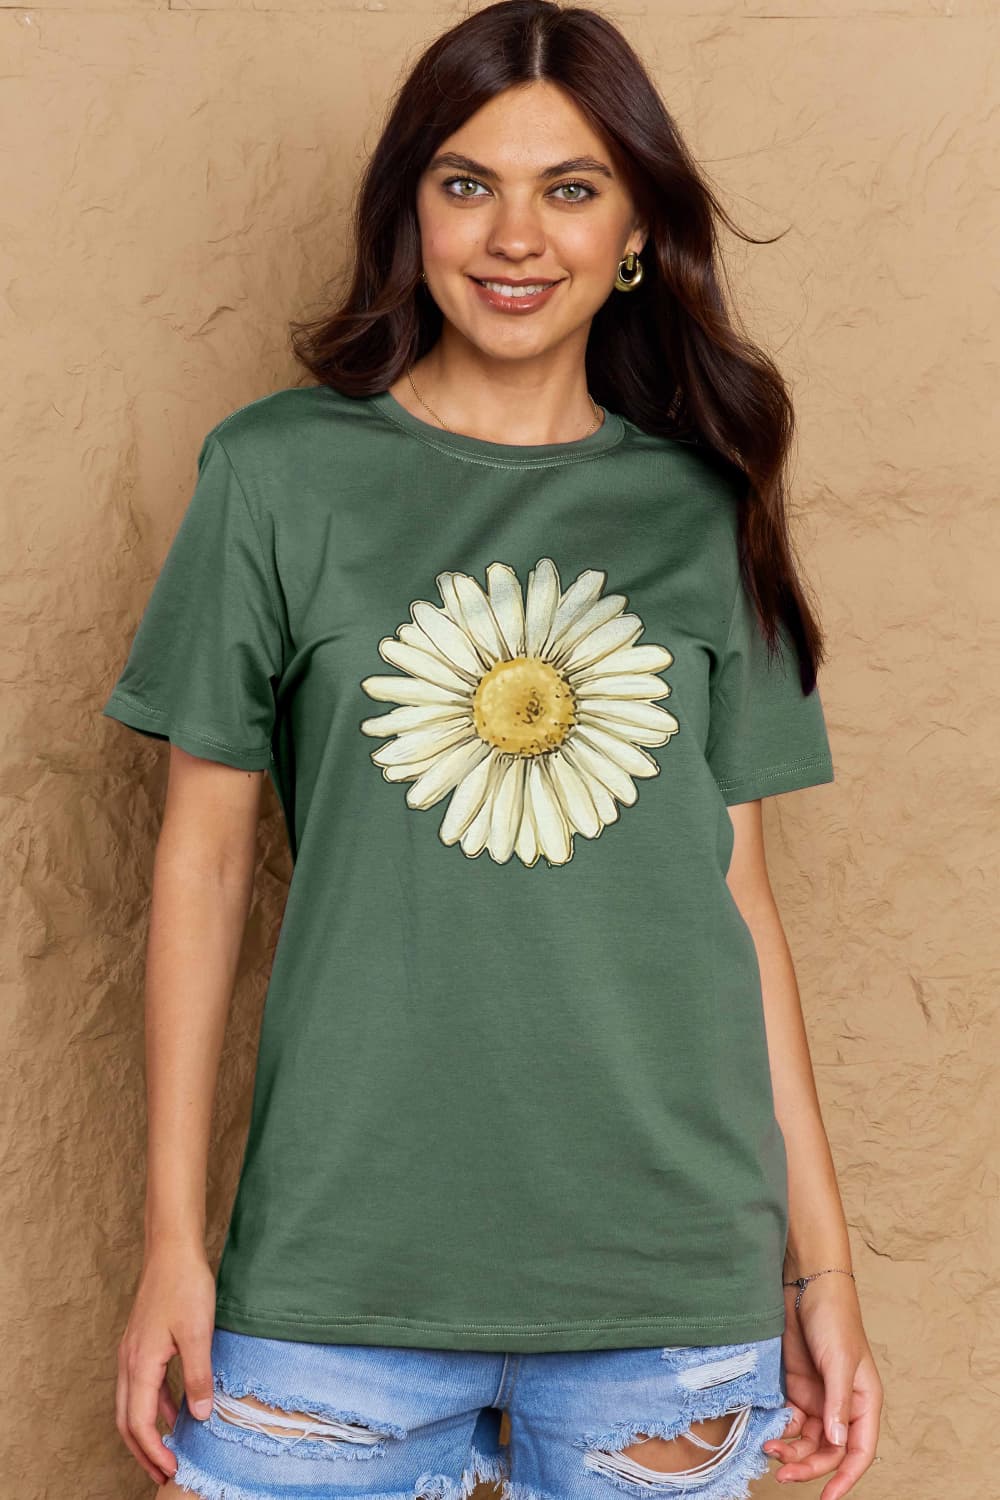 Simply Love Full Size FLOWER Graphic Cotton Tee  Krazy Heart Designs Boutique   